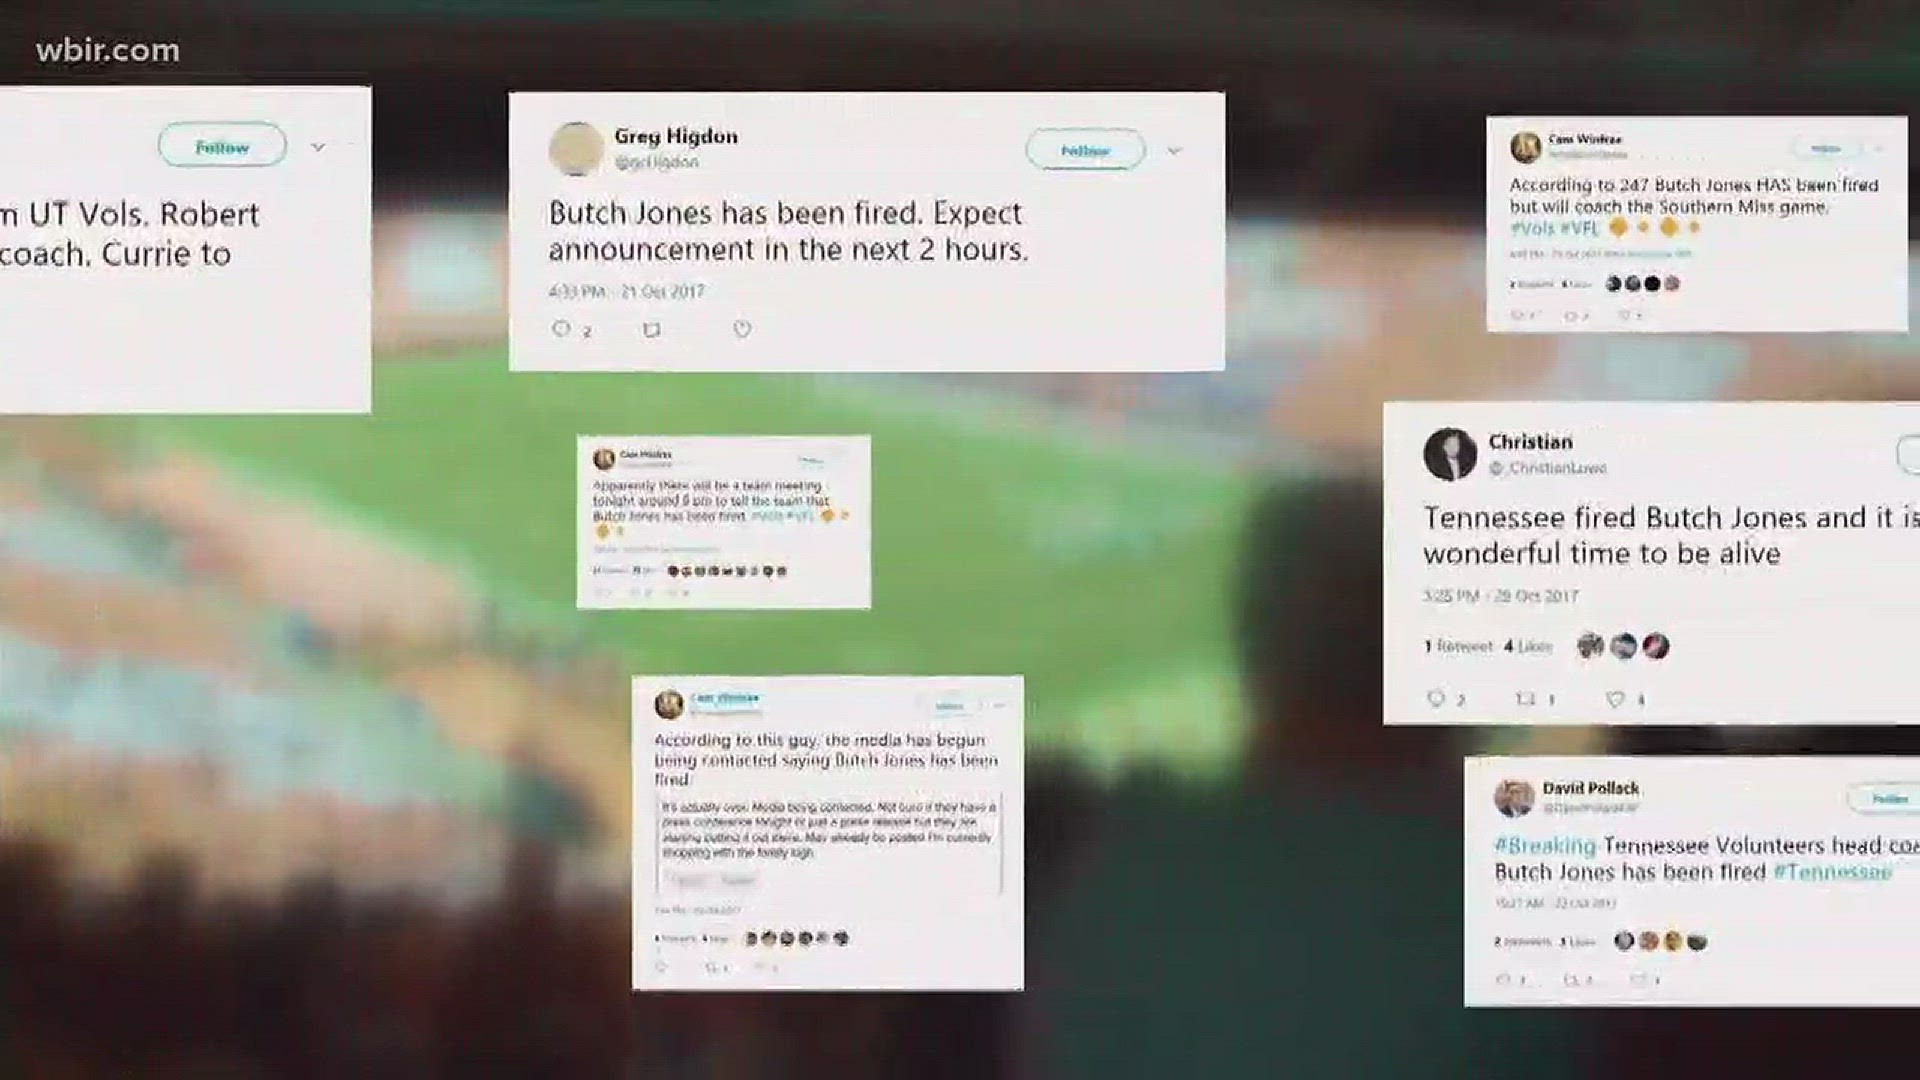 Oct. 30, 2017: Dozens of social media accounts meant to look like credible sources are spreading rumors about the future of UT football coach Butch Jones. Here's how to tell fake accounts from the real ones.